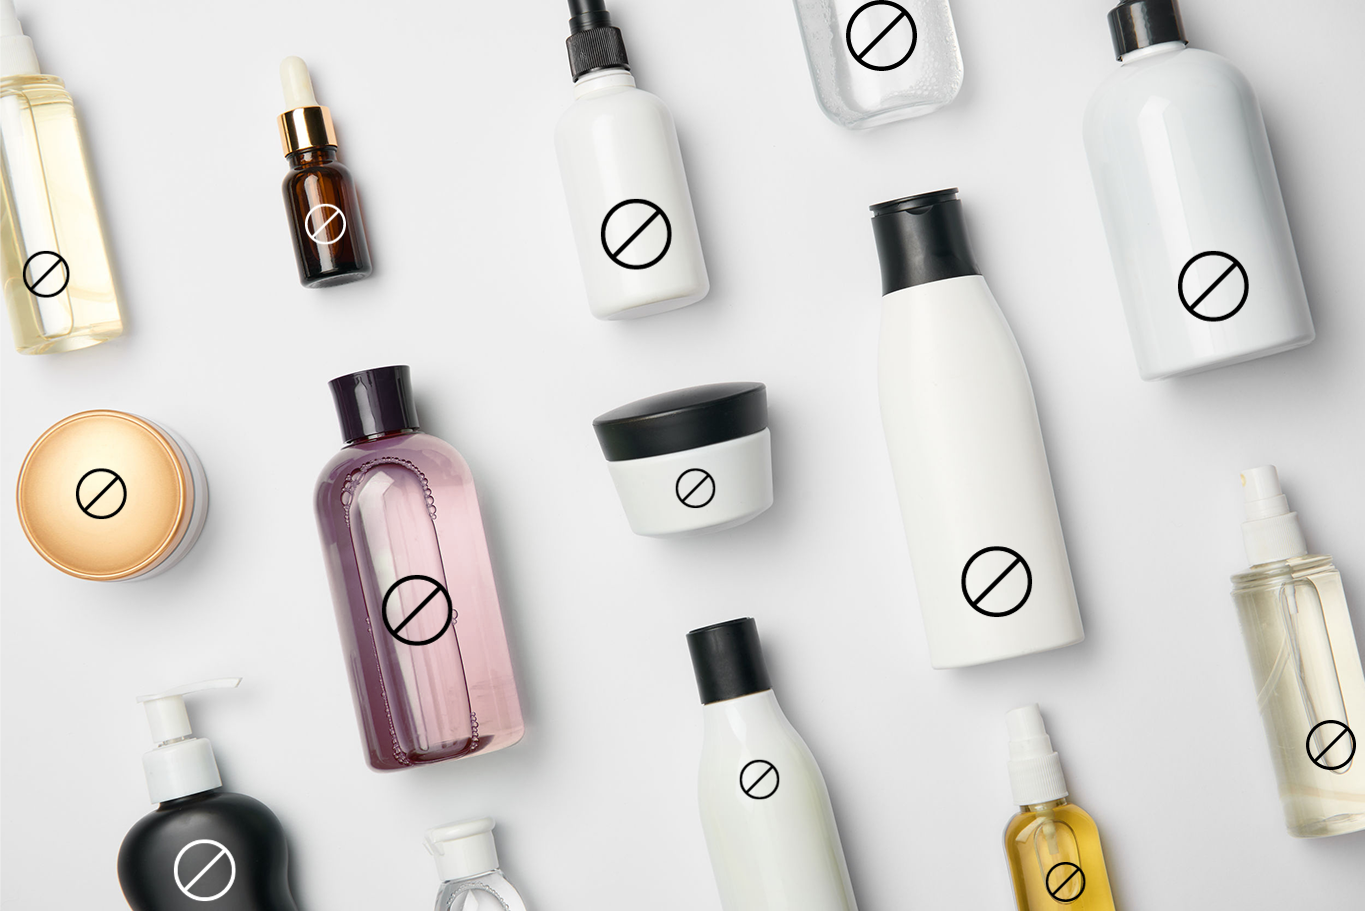 an image of cosmetic bottles laying flat on a white surface with the "no" symbol on the bottles